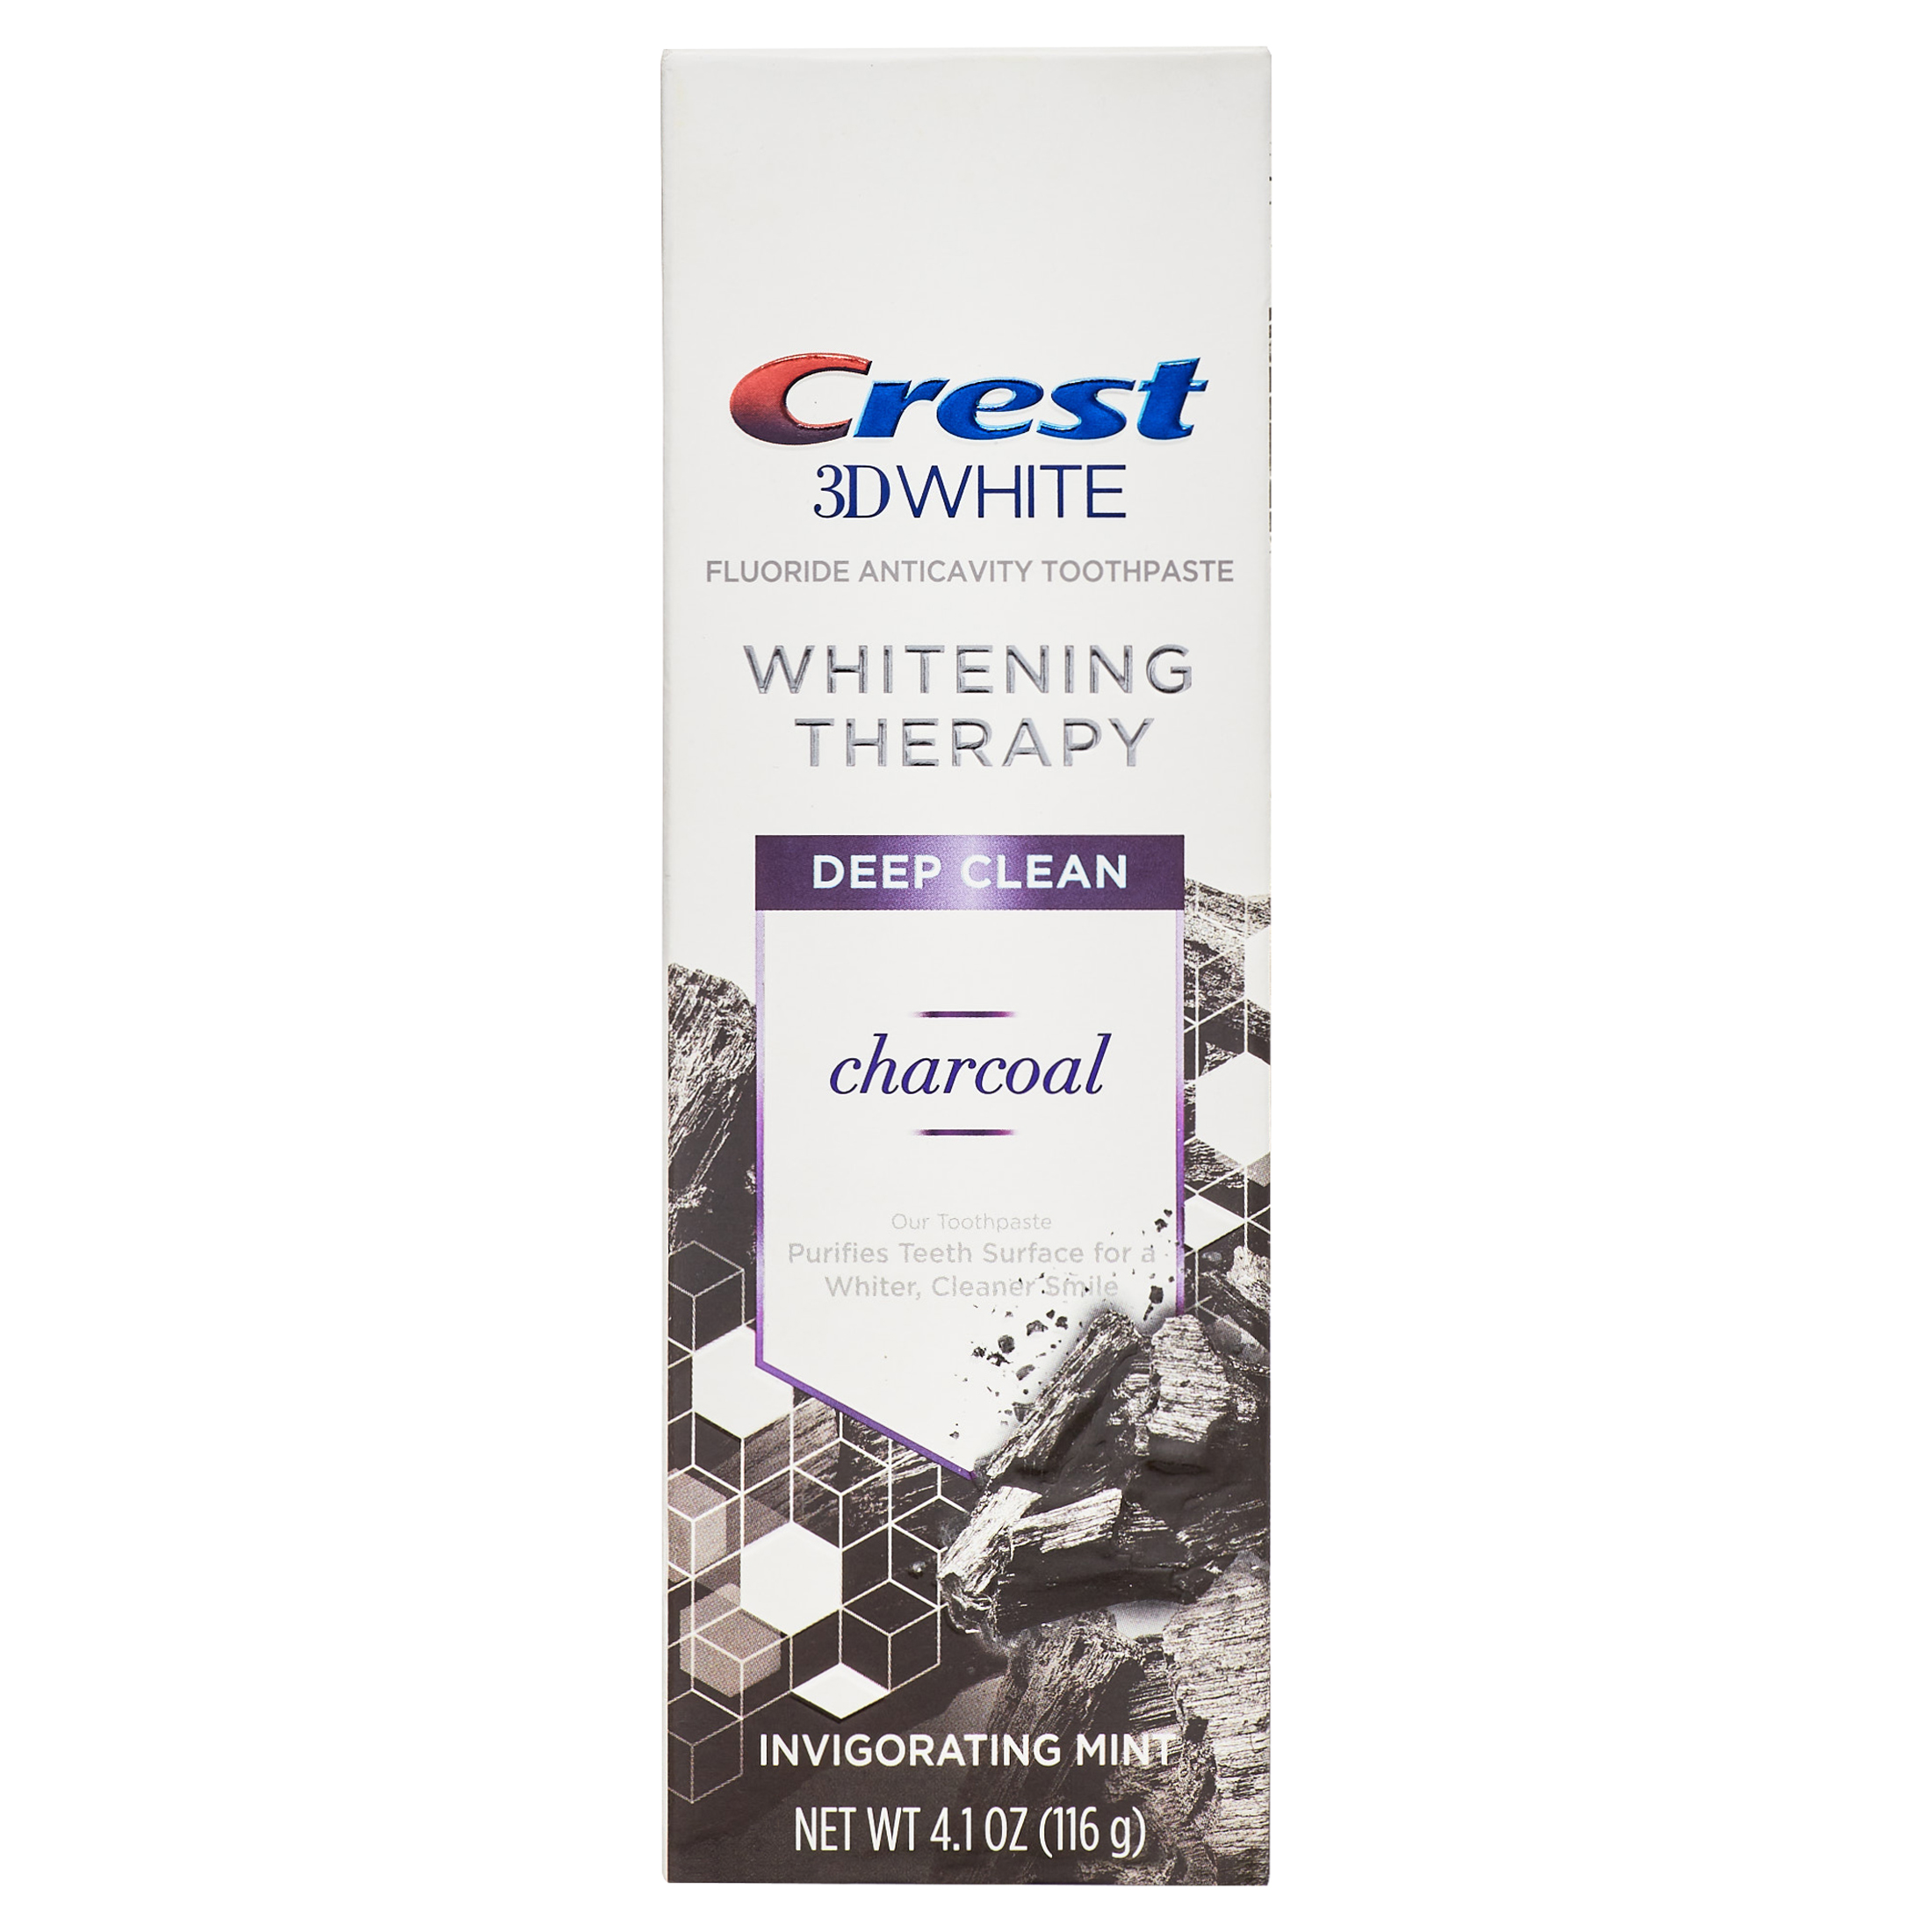 Crest 3D White Whitening Therapy Charcoal Deep Clean Toothpaste, Mint, 4.1 oz - image 1 of 11